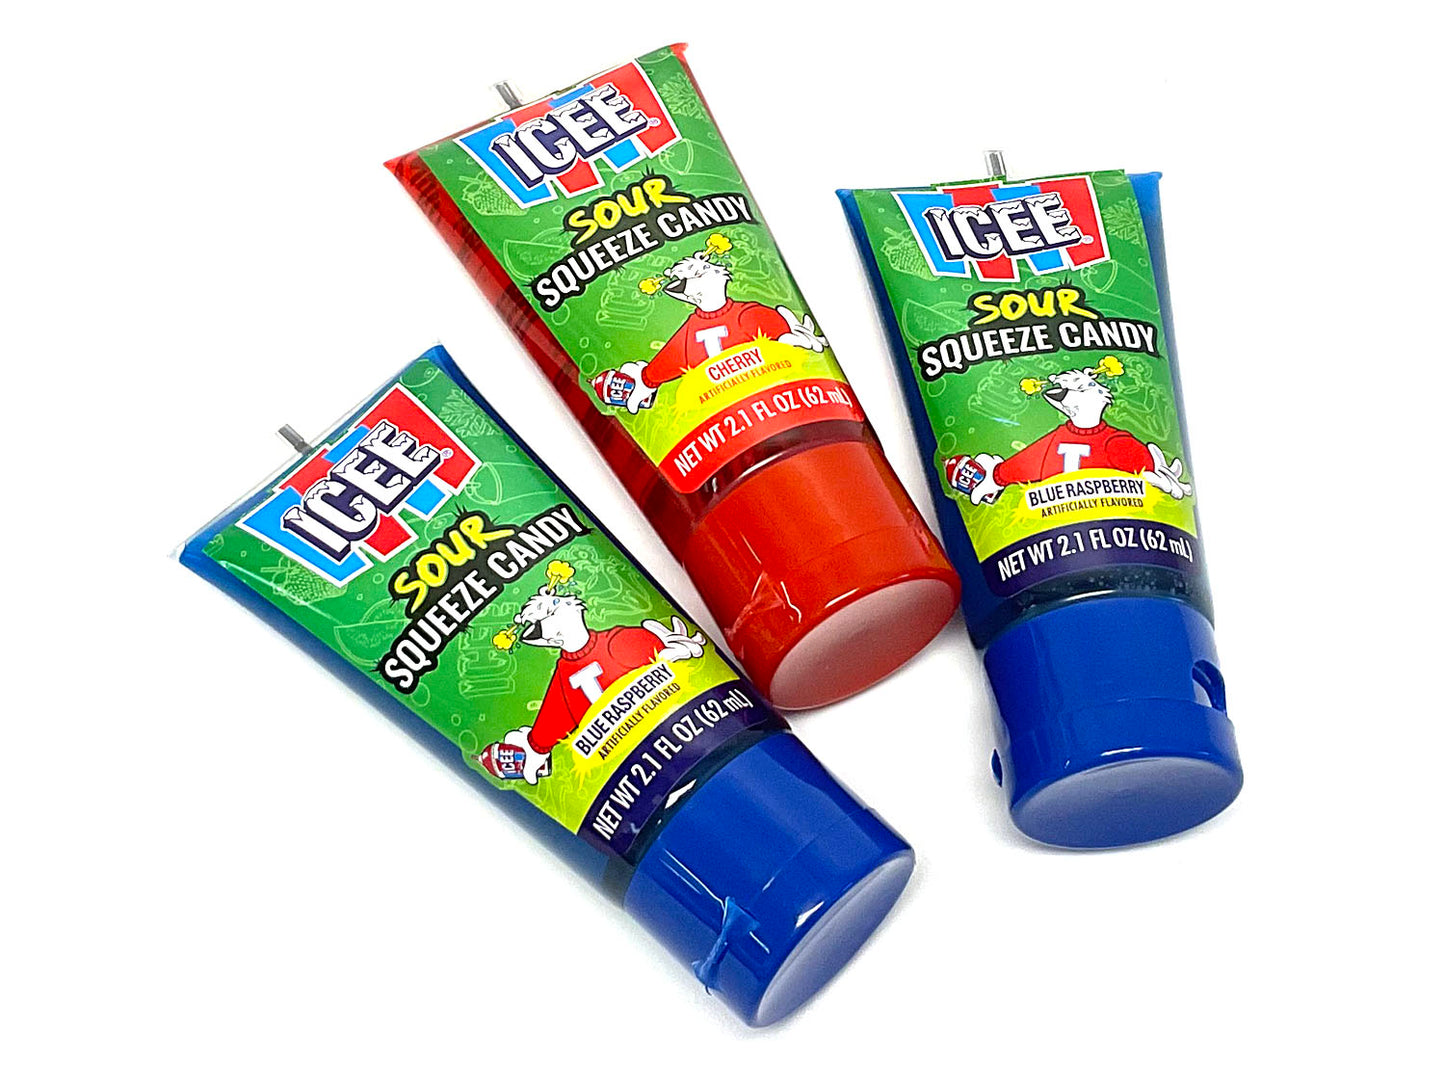 ICEE Sour Squeeze Candy - 2.1 oz tube - 3 flavors